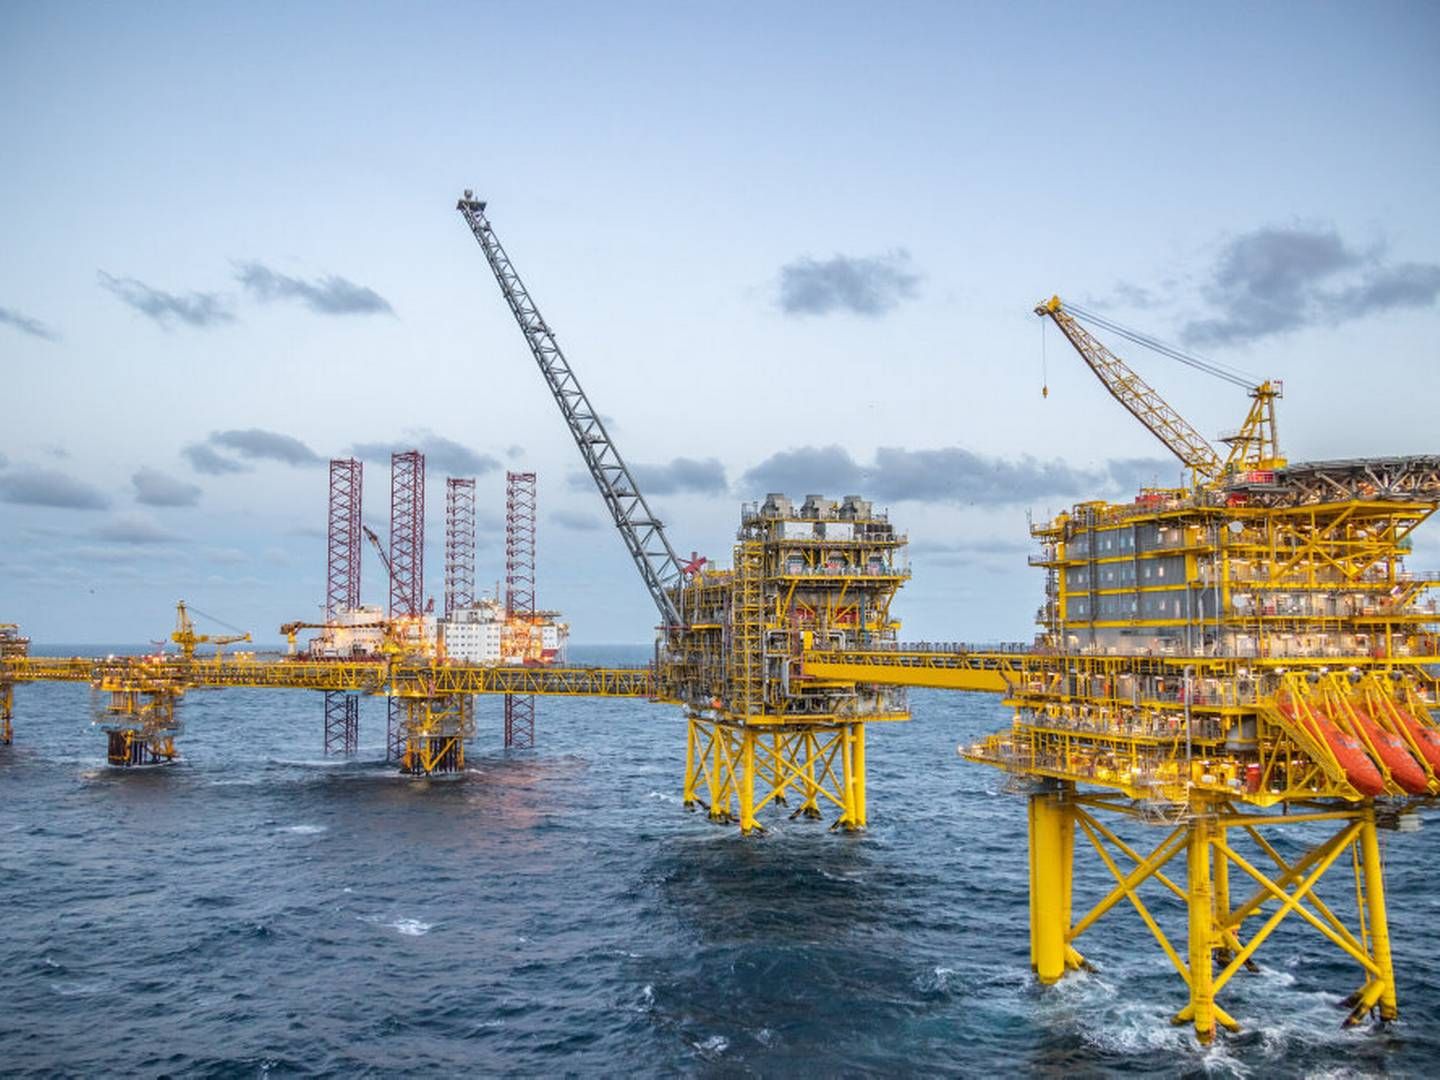 The connection of the Tyra field is one of the reasons why the gas supply in Denmark looks stable. | Foto: Totalenergies/pr